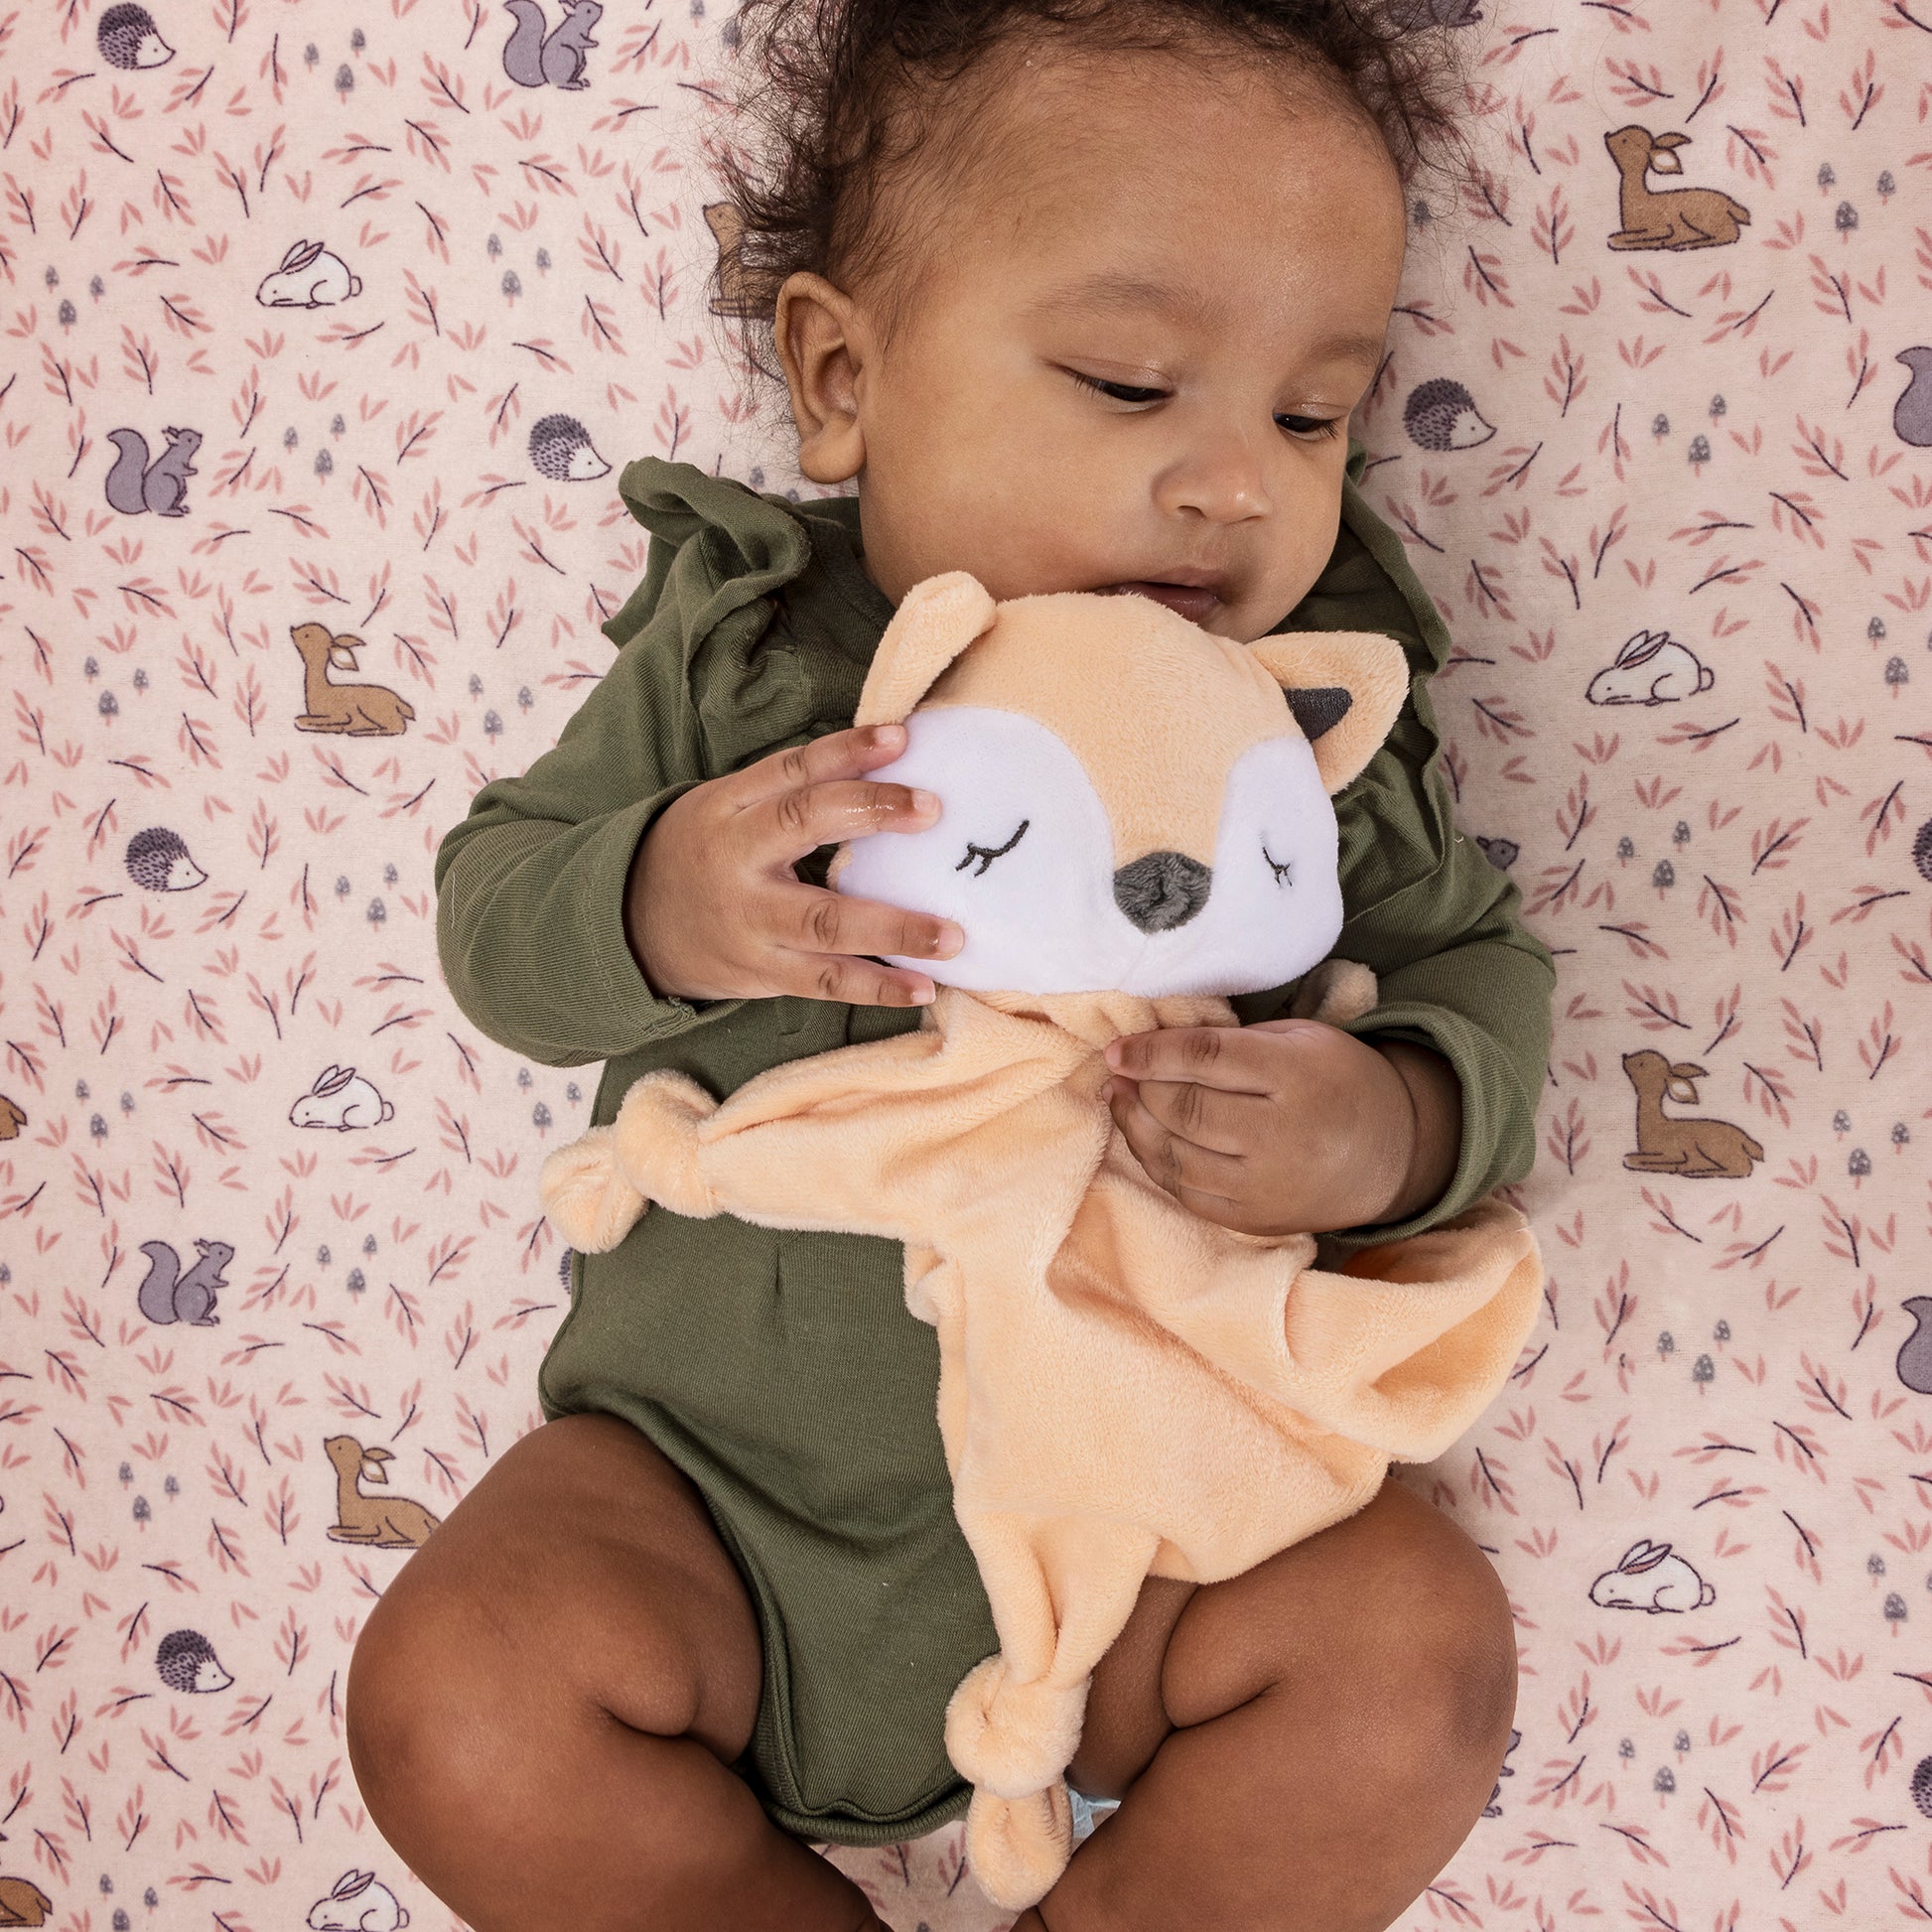  Fox Security Blanket;our soft cuddly companion is made with cozy plush pale orange fabric to help your baby stay calm and content.